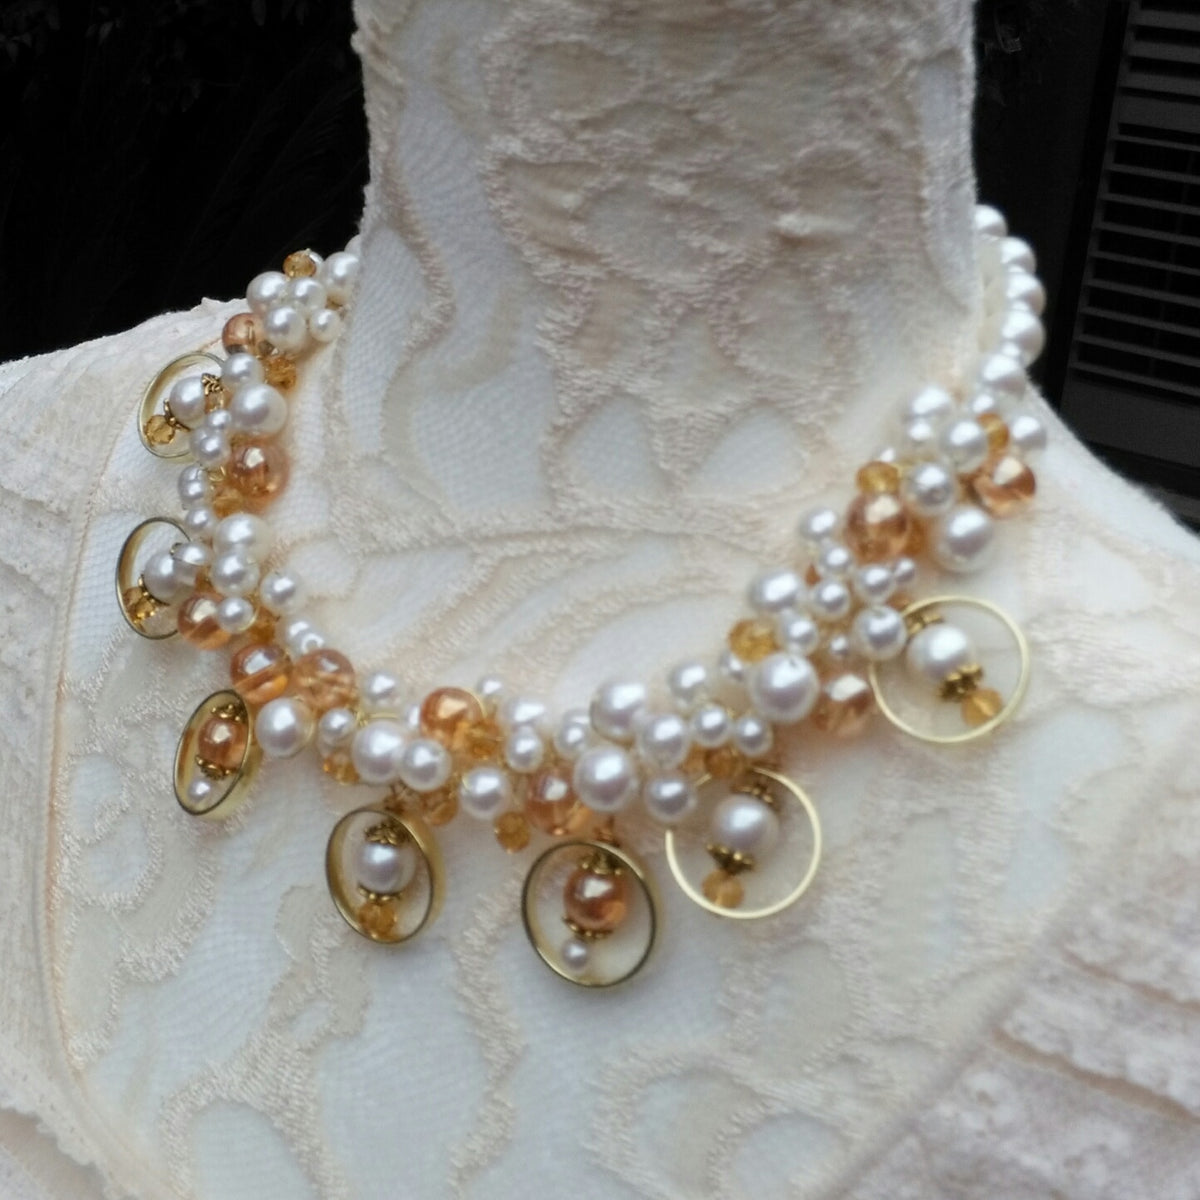 Unique Pearl Bridal Statement Necklace, Chunky Wedding Necklace, OOAK Fancy Gift for Her